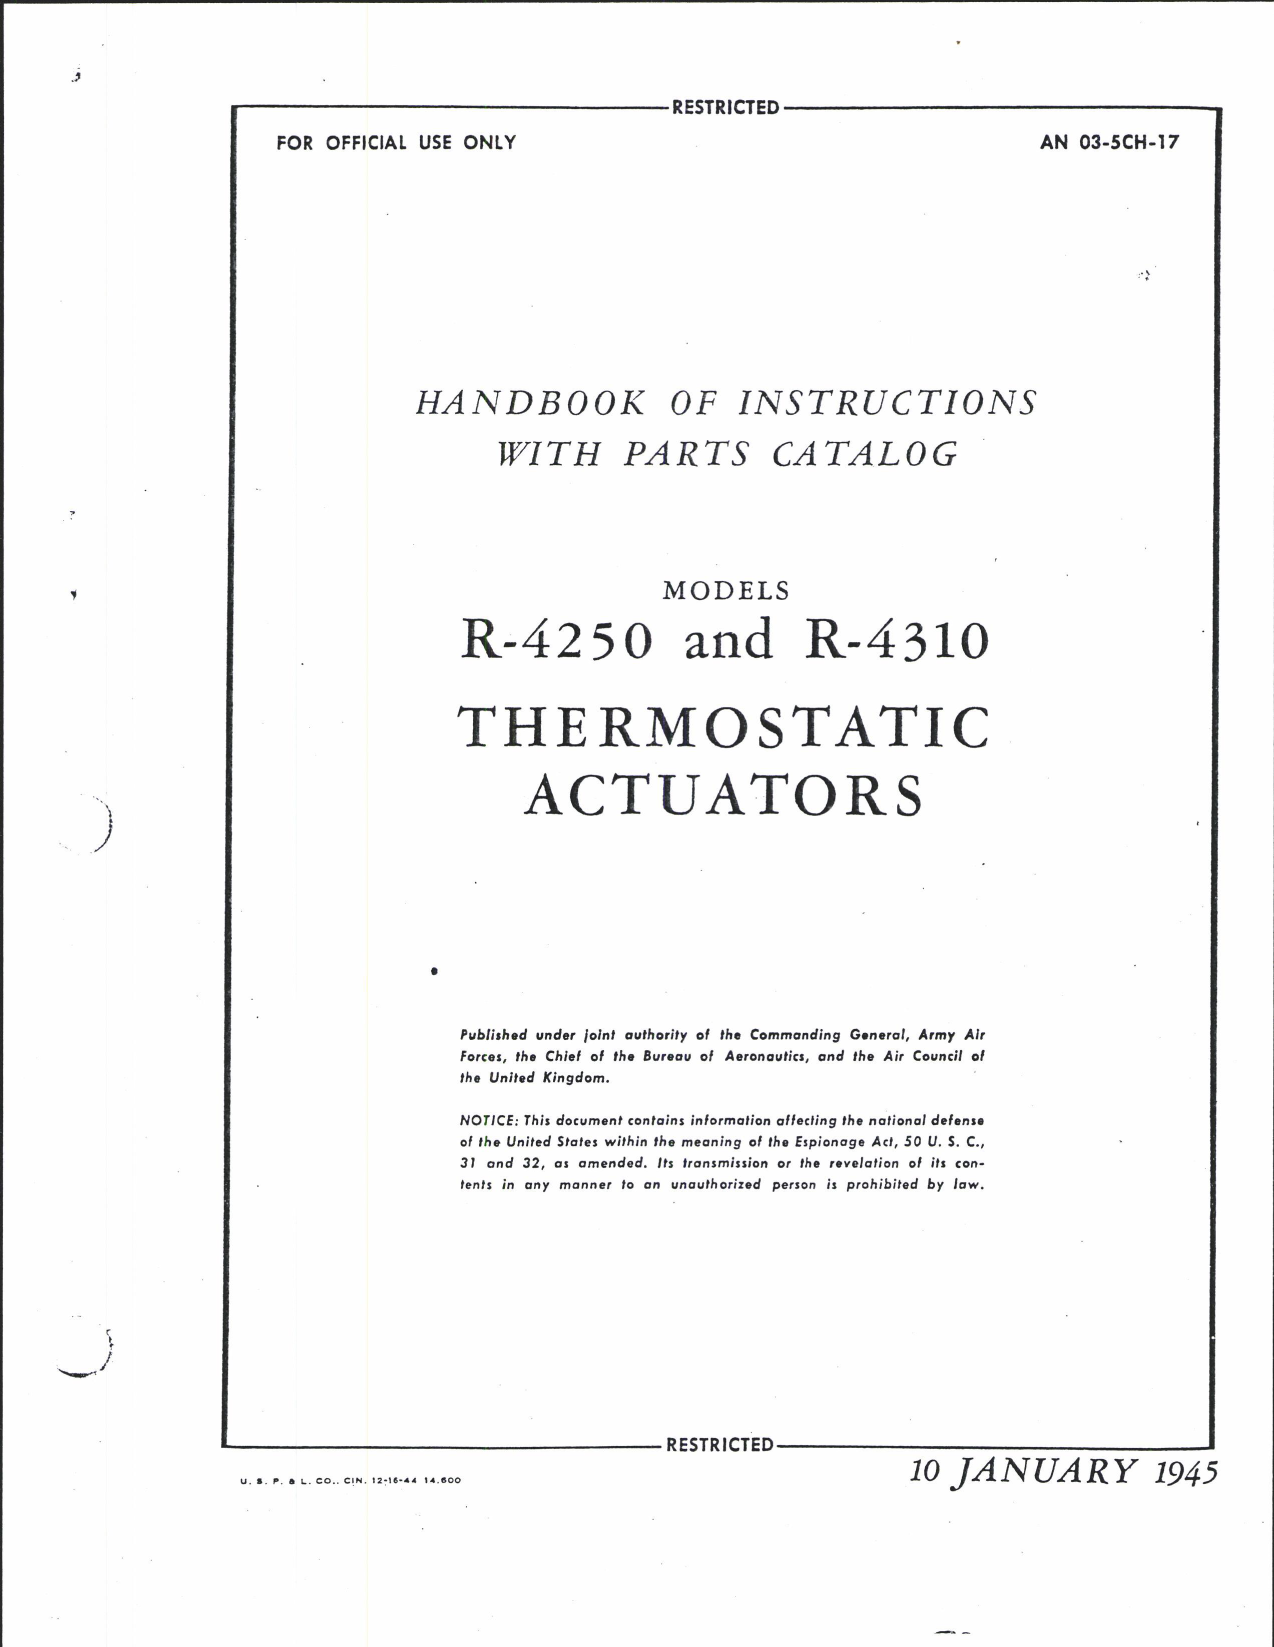 Sample page 5 from AirCorps Library document: Operation, Service & Overhaul Instructions with Parts Catalog for Thermostatic Actuators